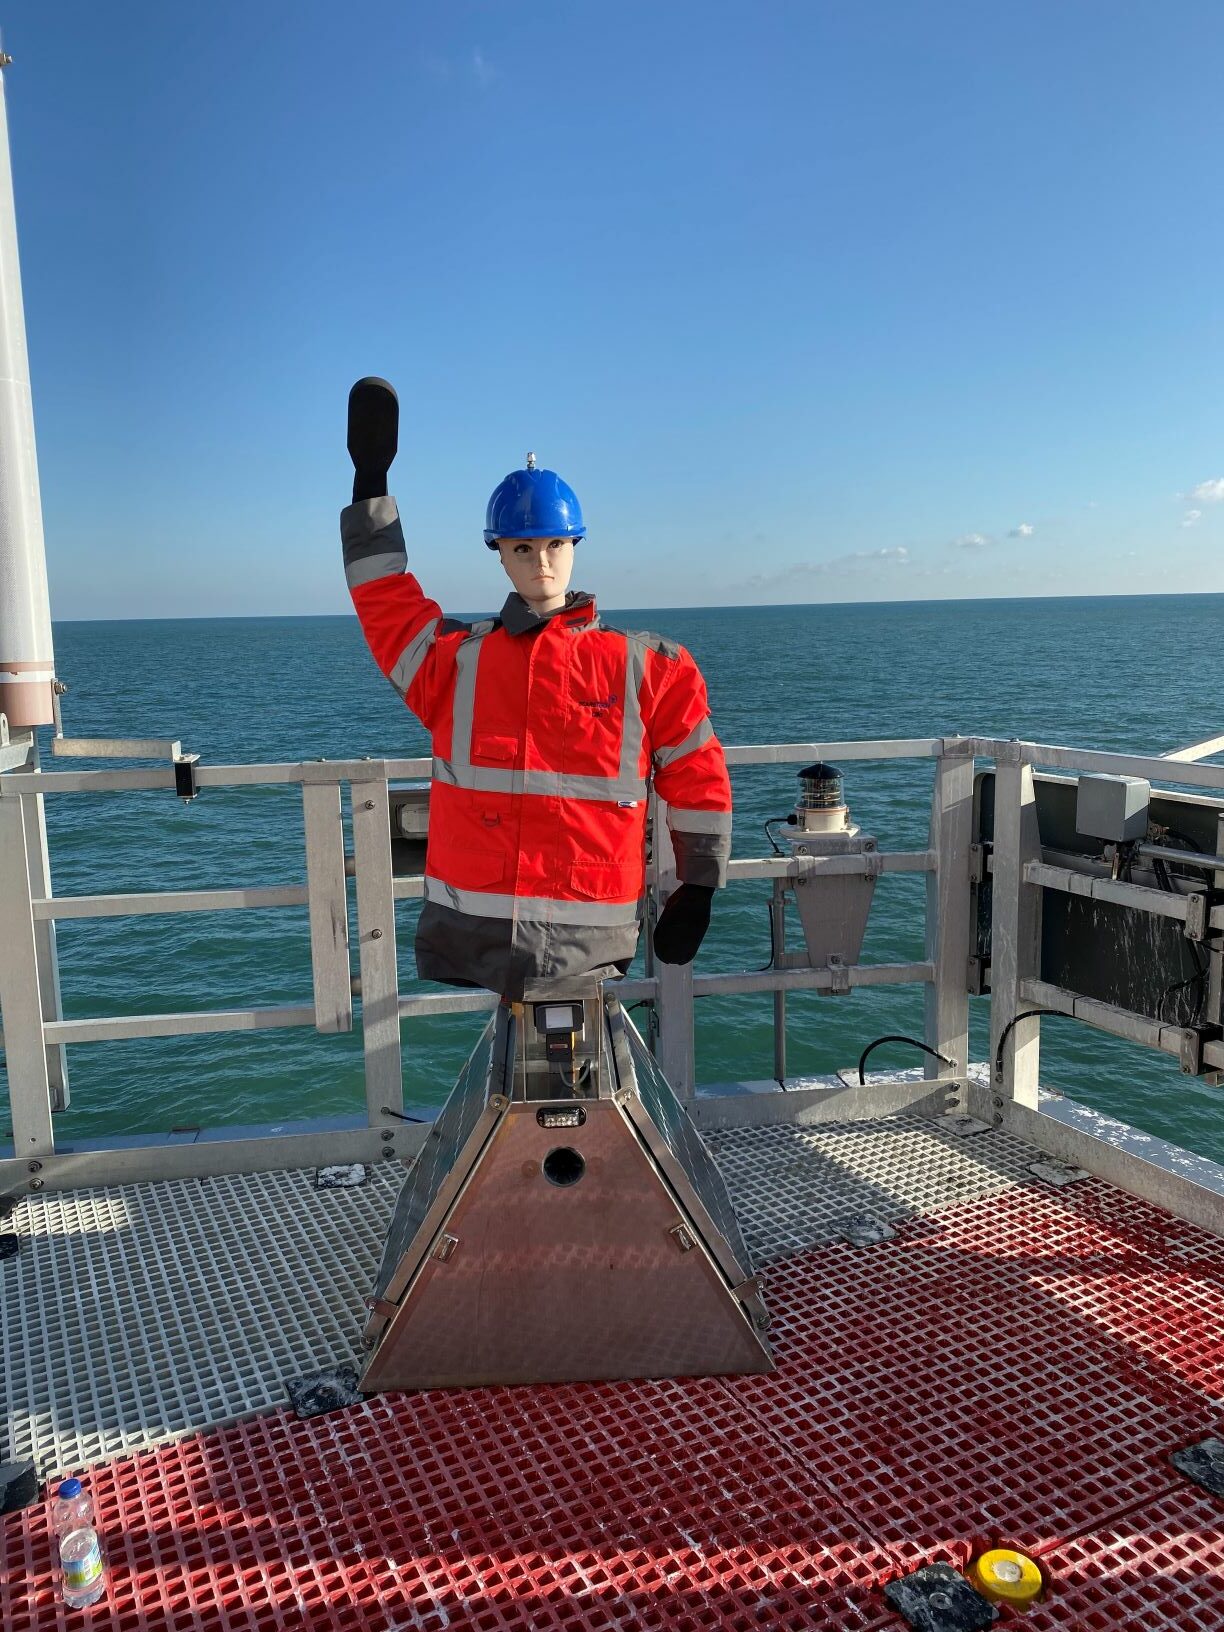 Galloper Makes Offshore Wind Scarecrow Tried-and-True